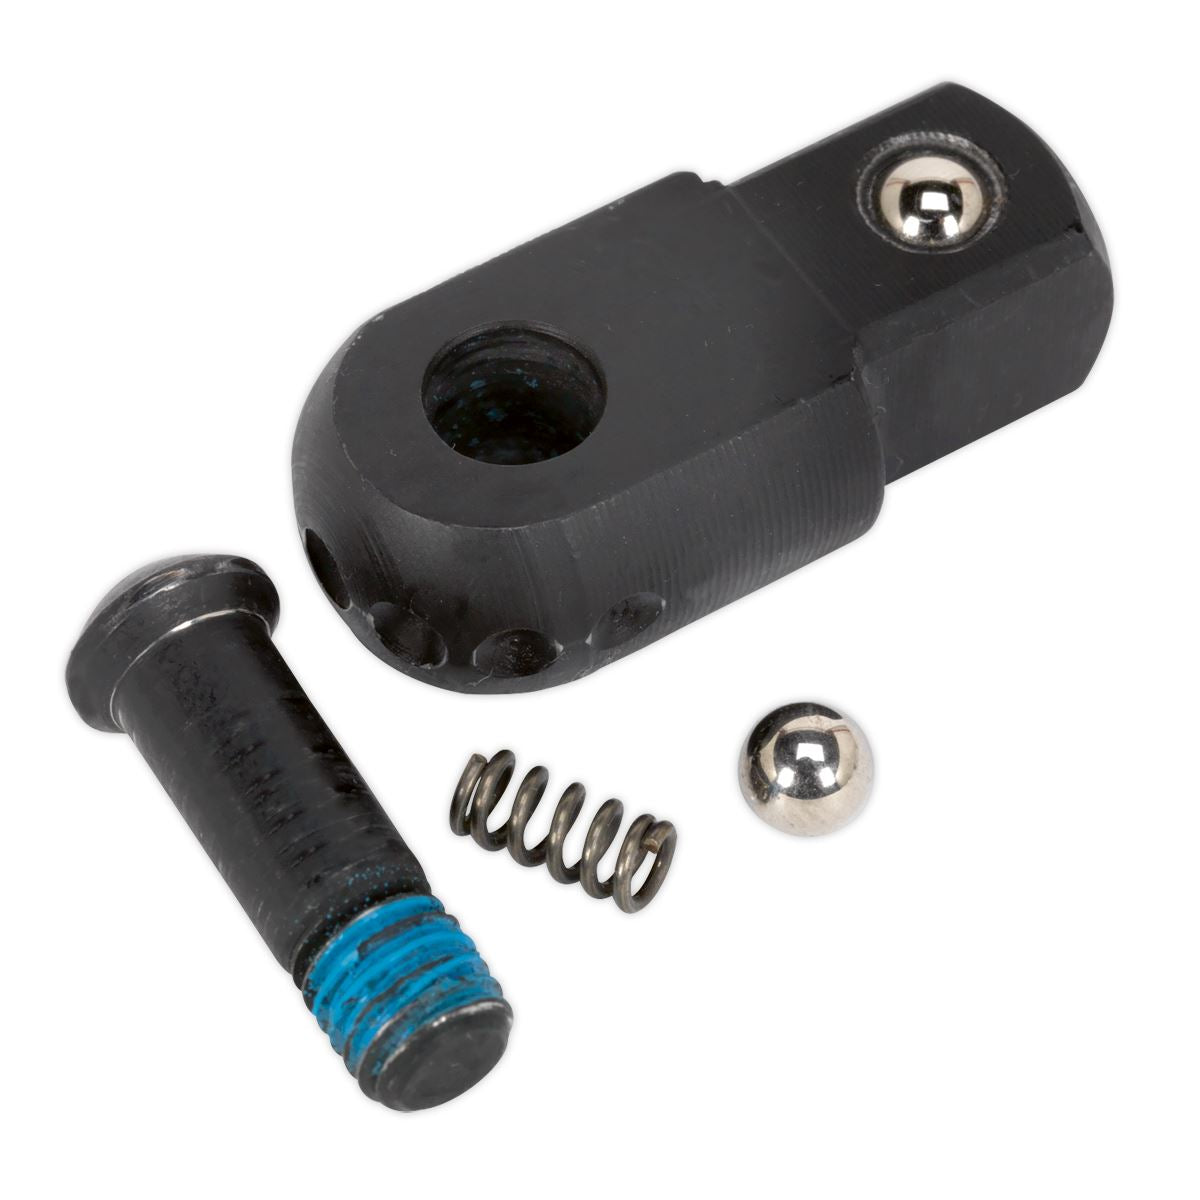 Sealey Premier Knuckle 1/2"Sq Drive for AK7303